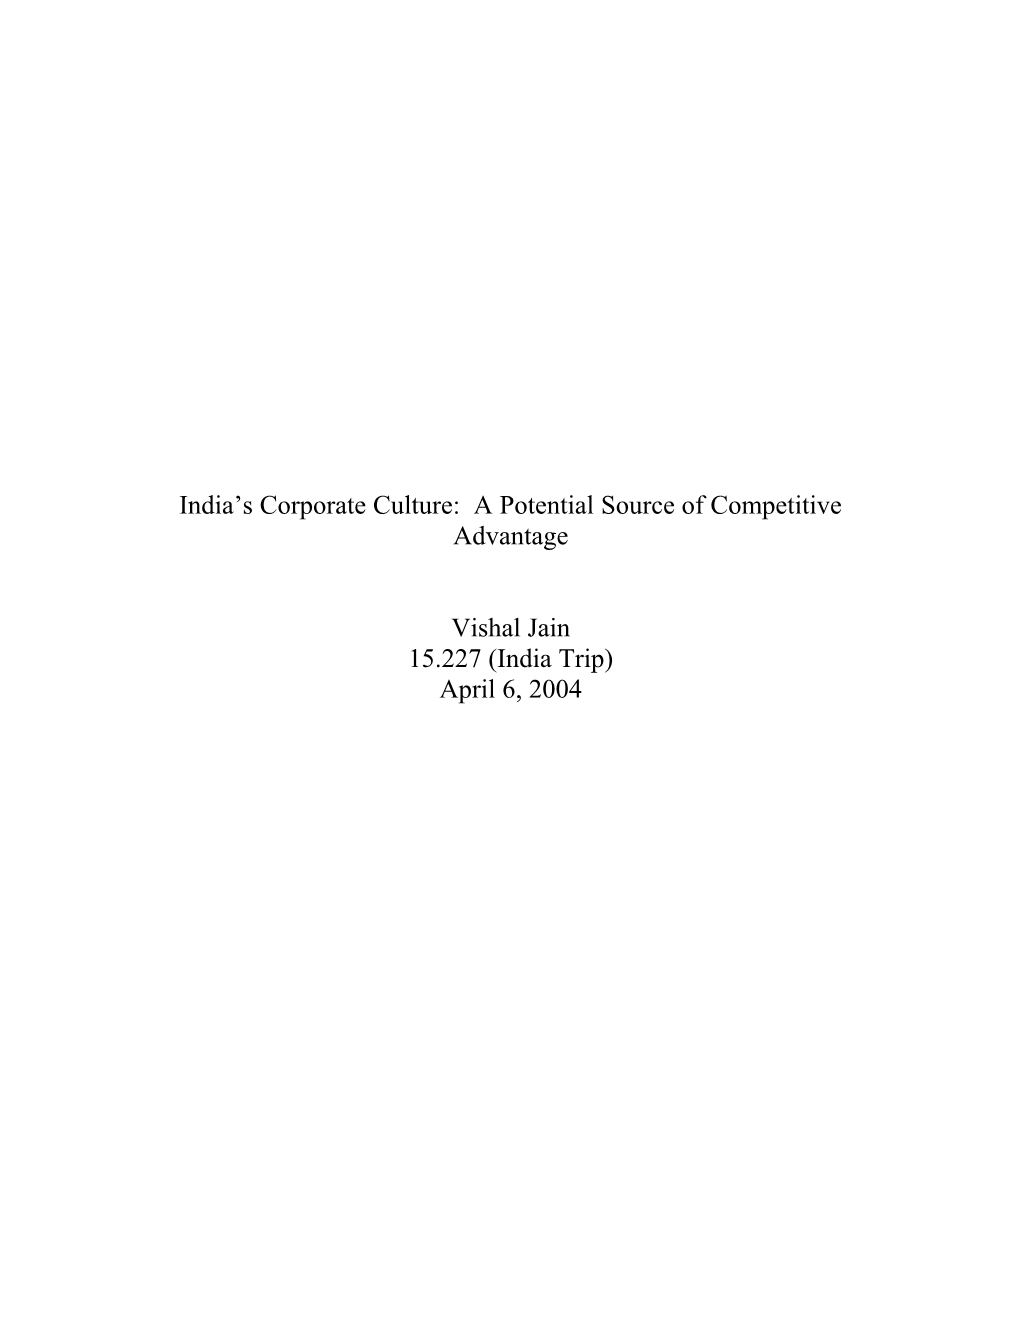 India S Corporate Culture: a Potential Source of Competitive Advantage